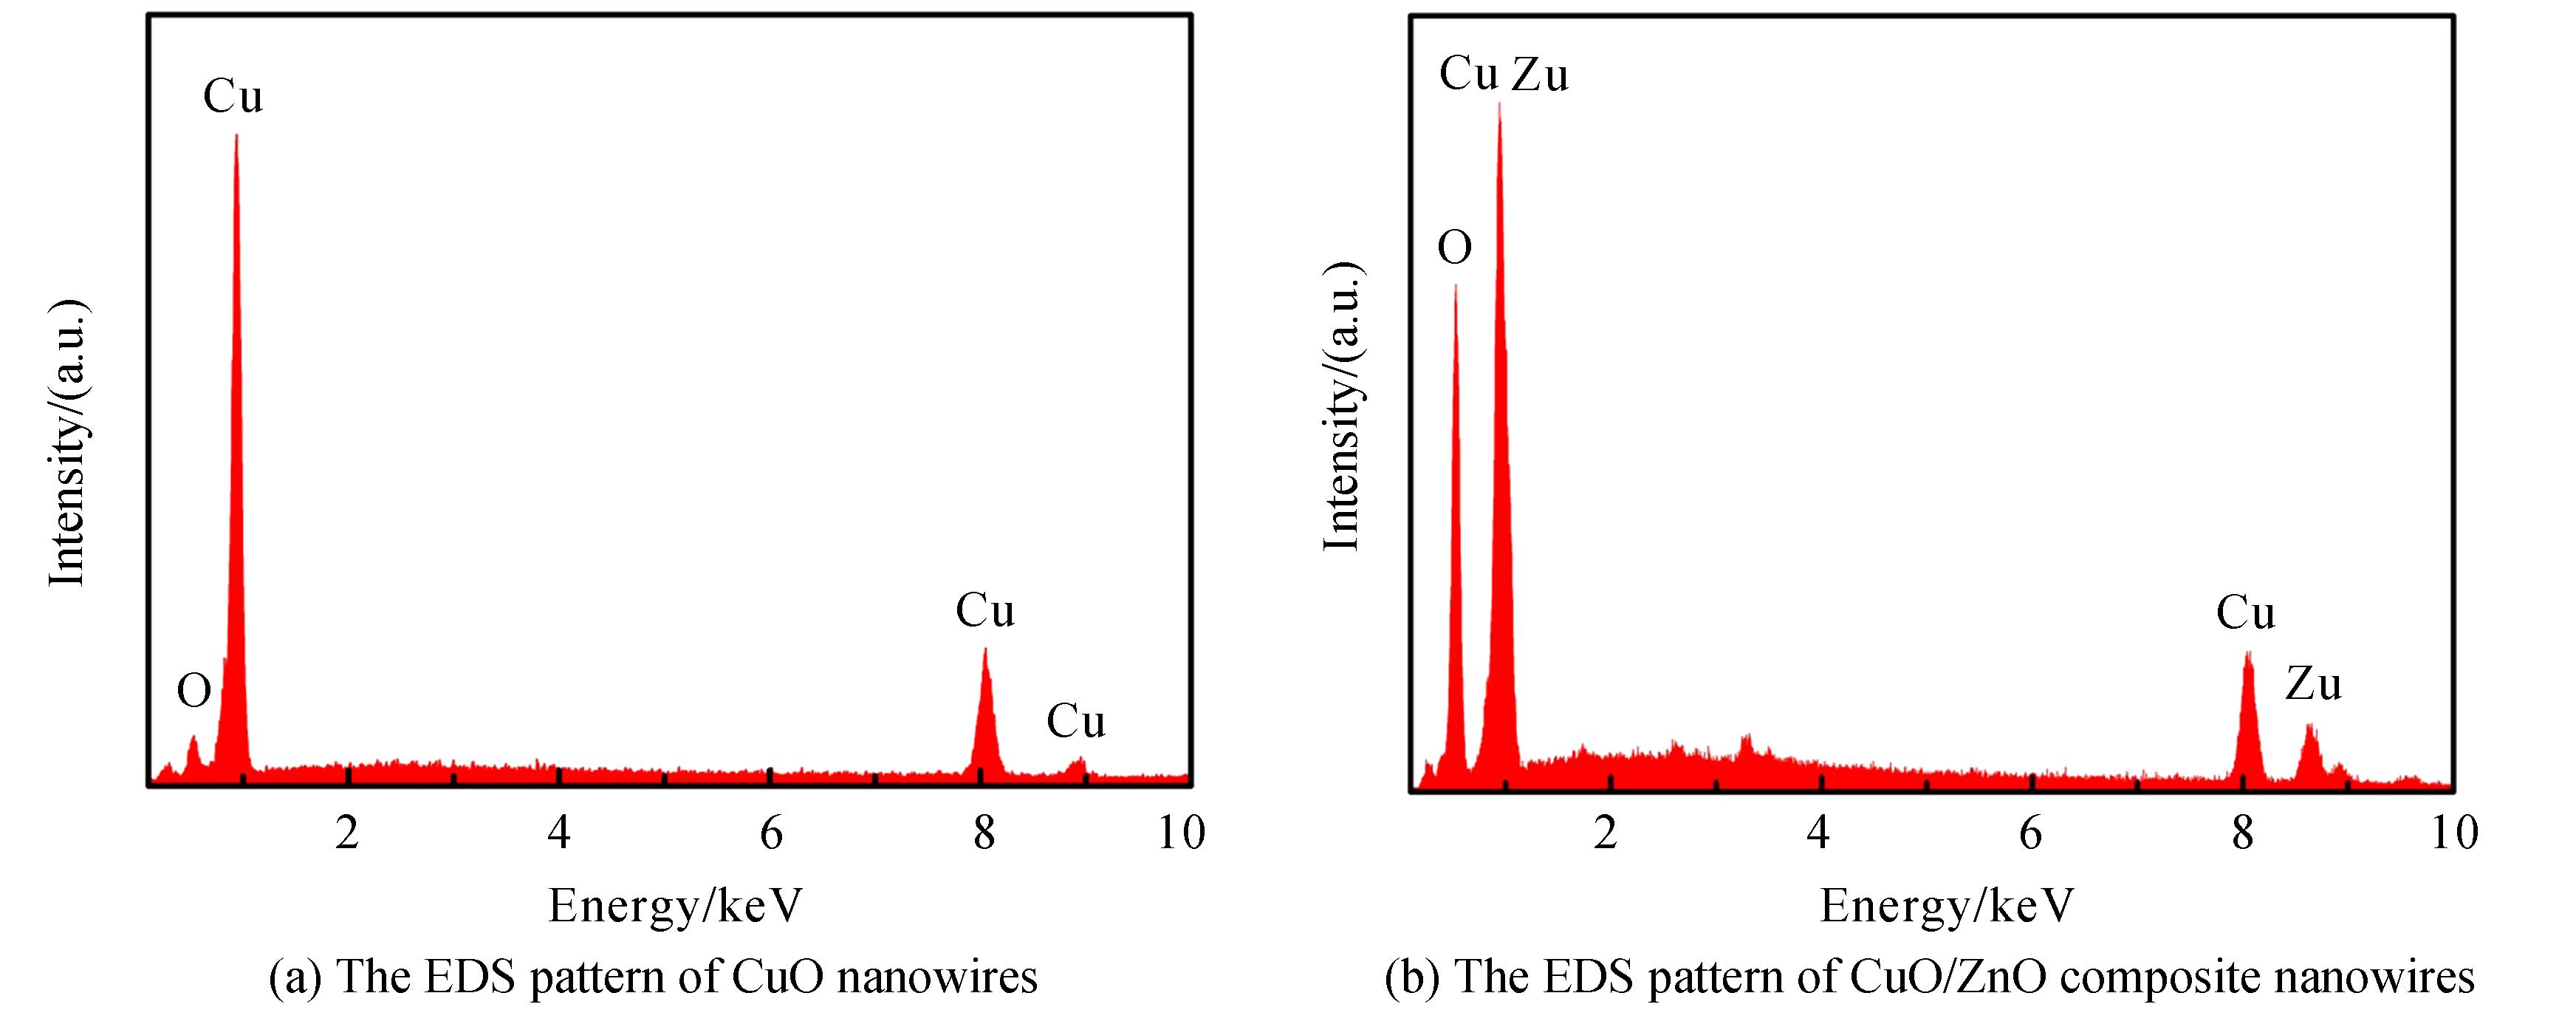 The EDS patterns of CuO nanowires and CuO/ZnO composite nanowires